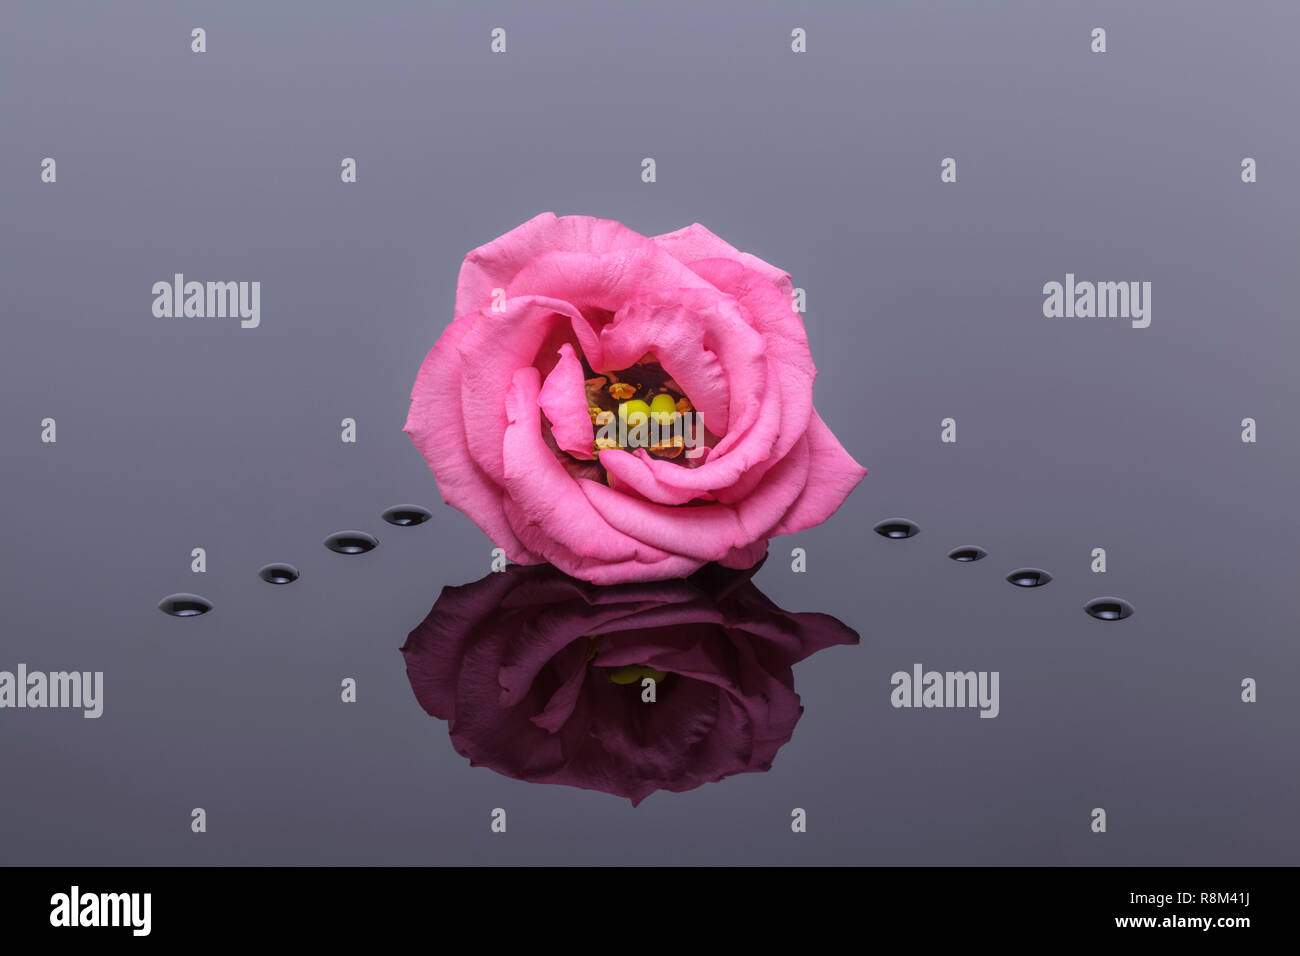 One flower head and waterdrops mirrored in background Stock Photo